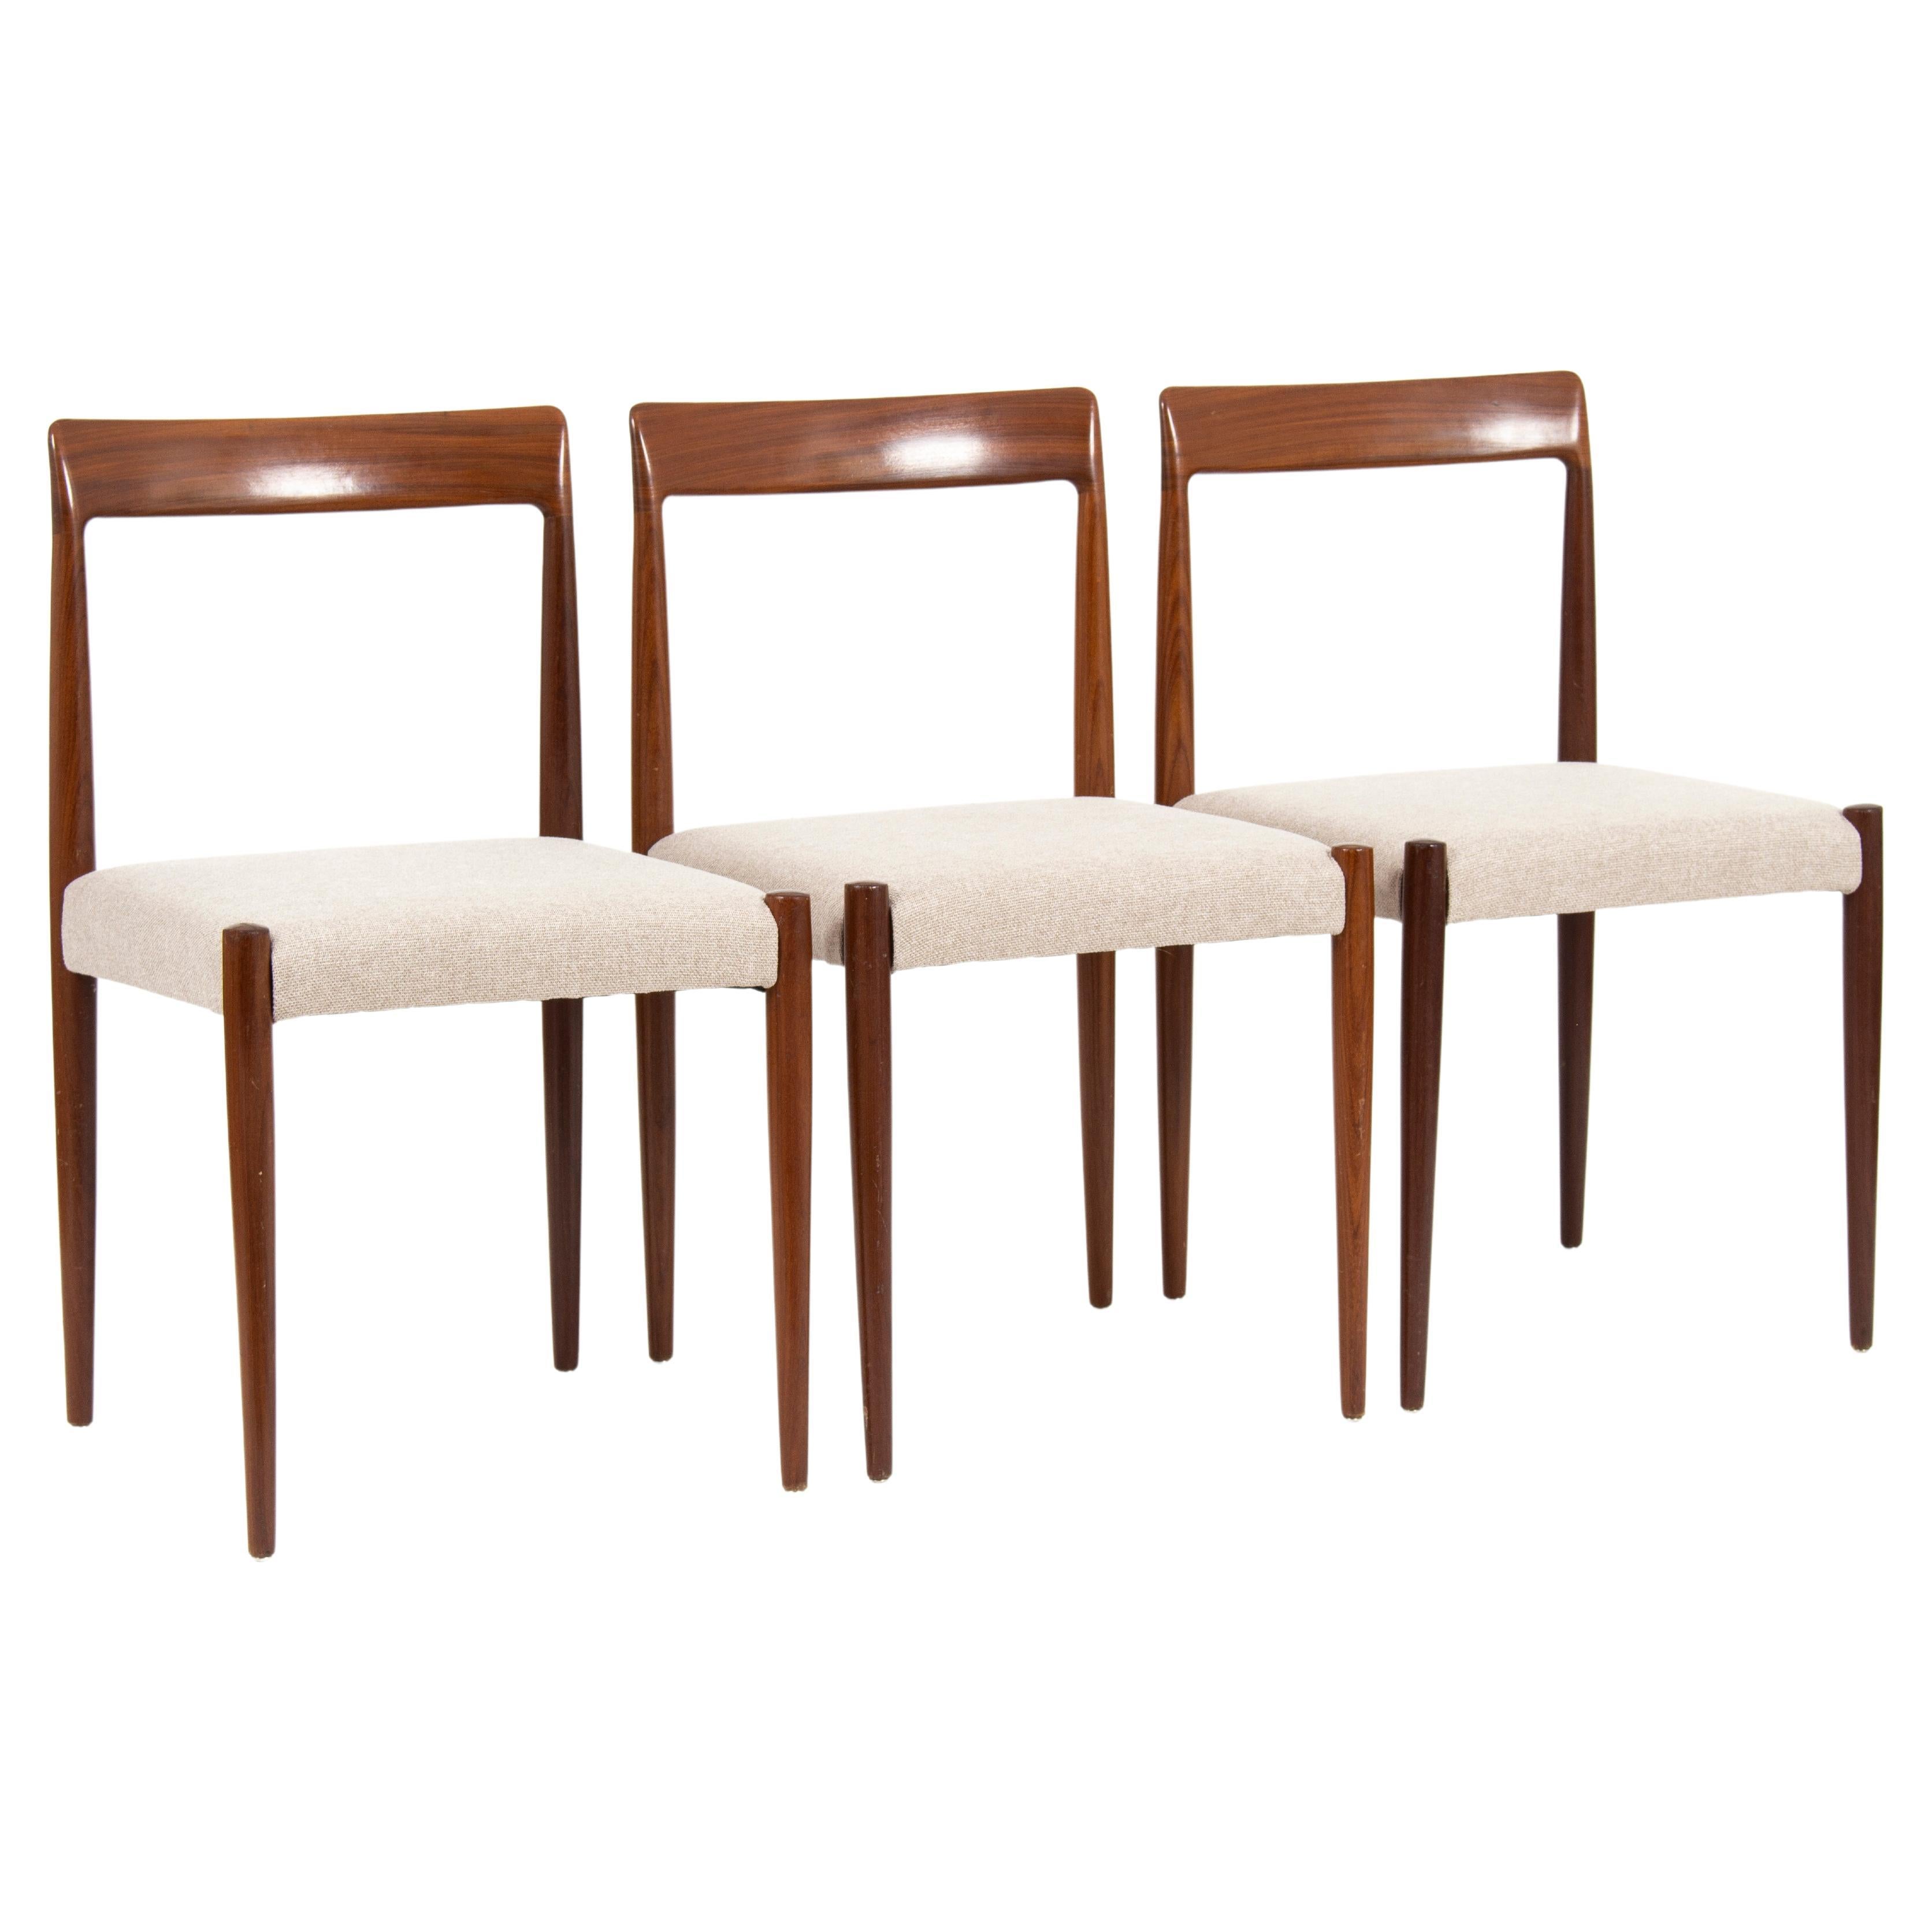 Set of 3 Dining Chairs by Karel Vyčítal, 1970s For Sale